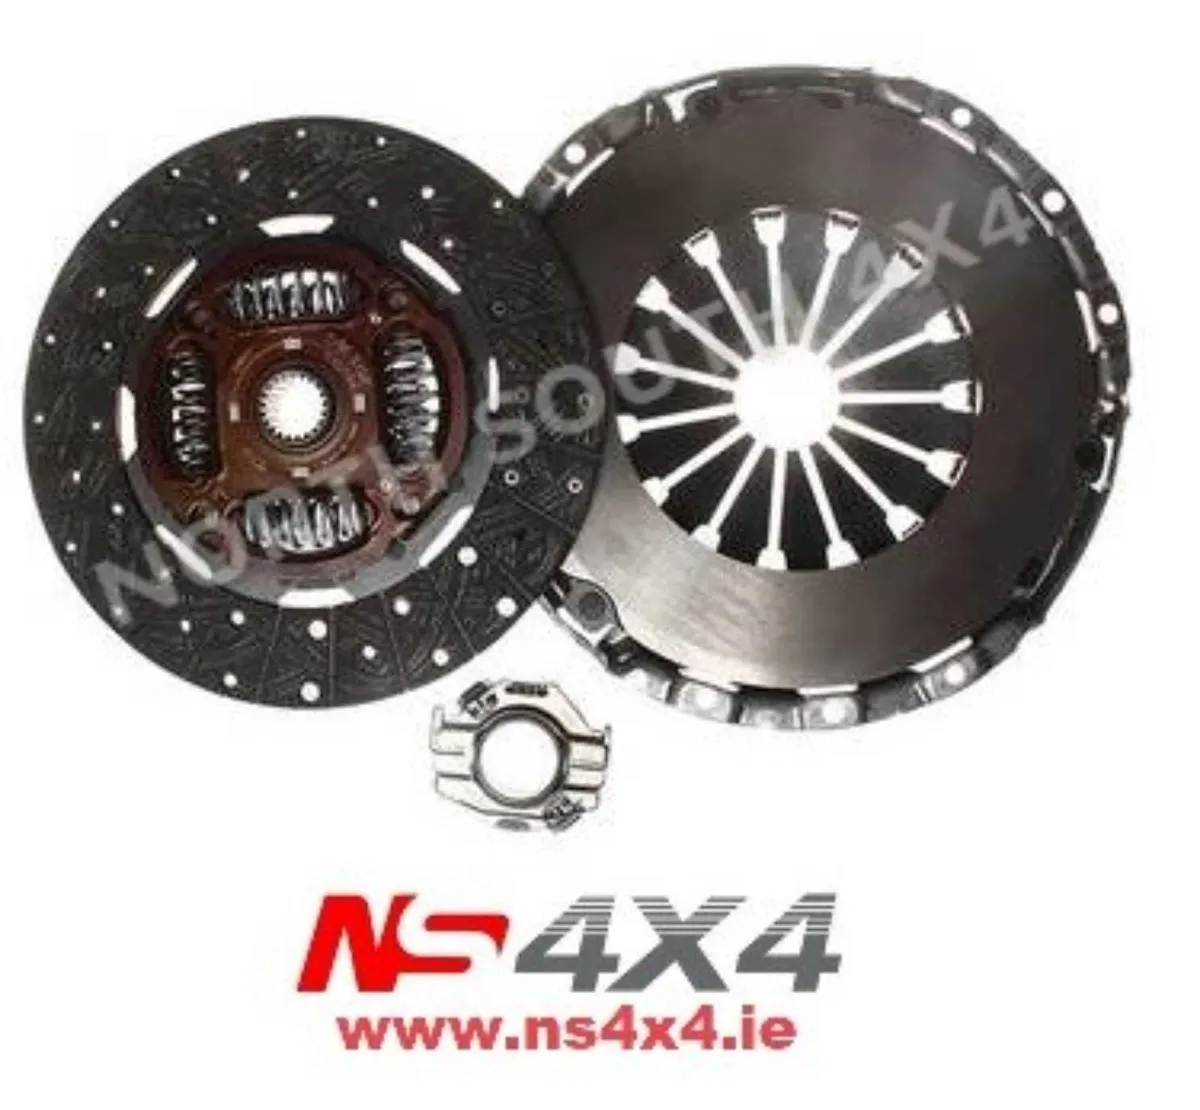 Toyota 4x4 Hilux Clutch Kit // all spares